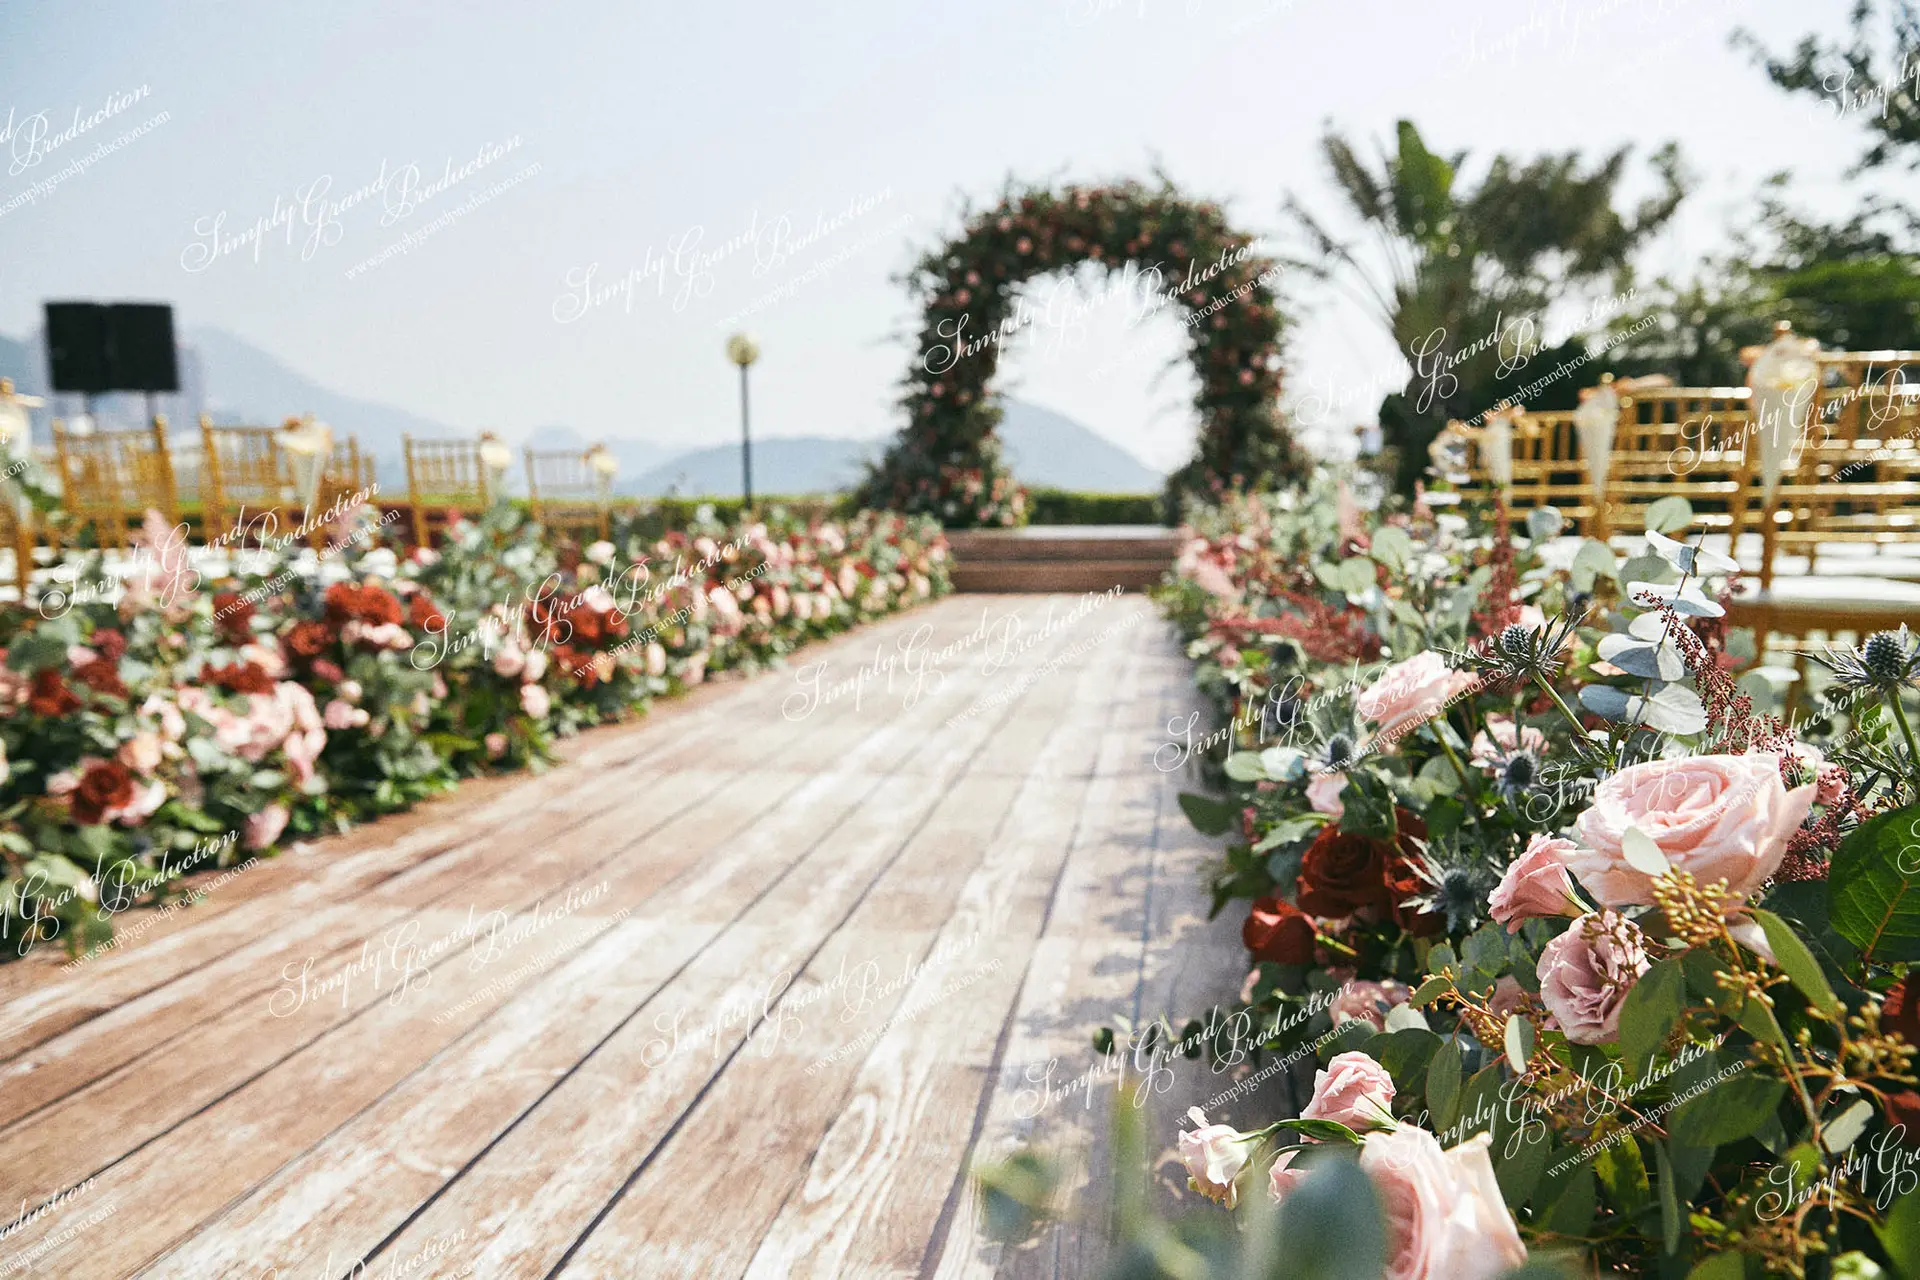 Simply_Grand_Production_Outdoor_wedding_decoration_wooden_floor_outdoordecor_Country_Club_2_7.jpg